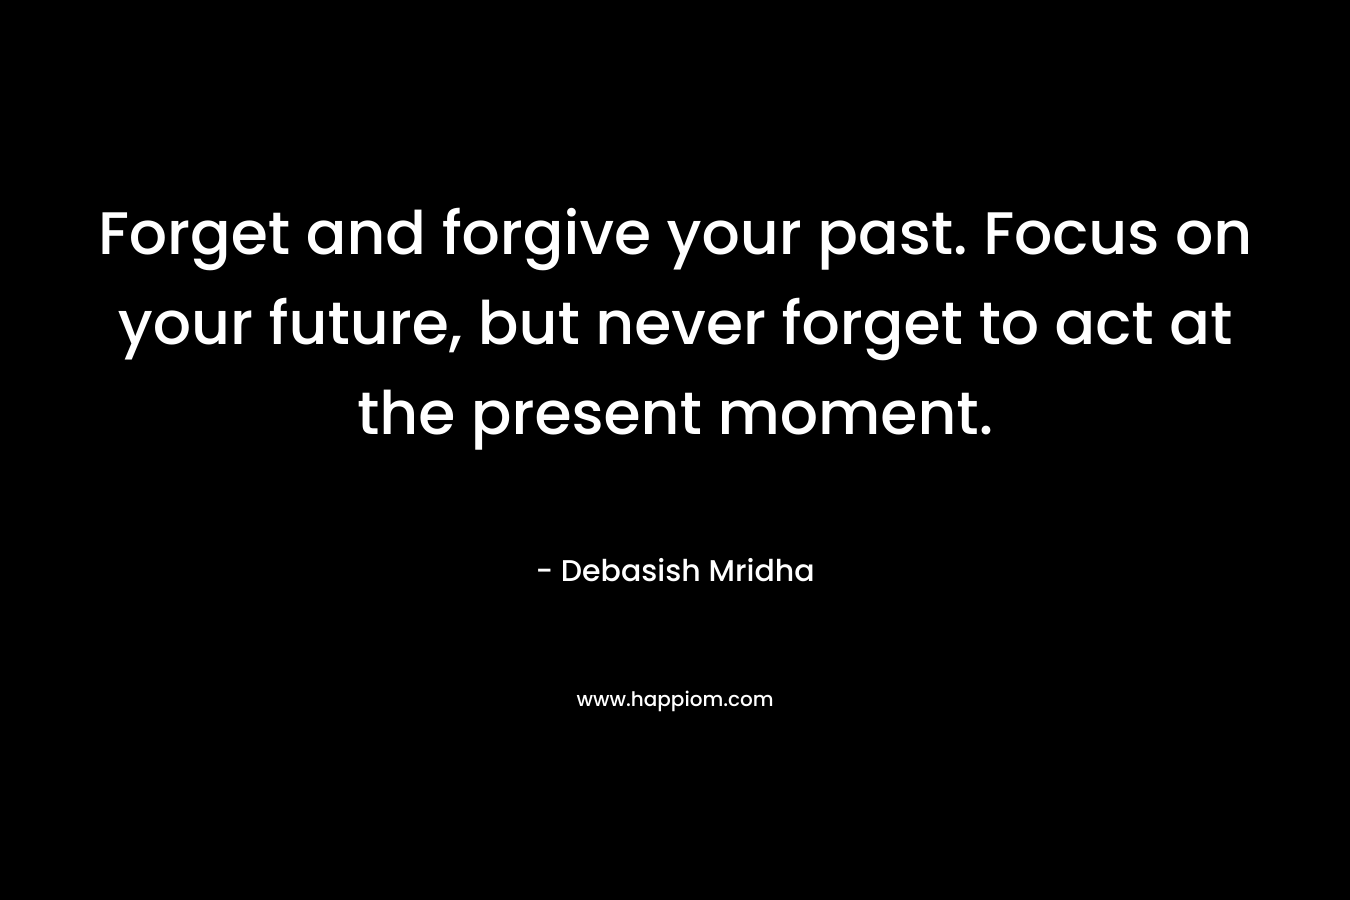 Forget and forgive your past. Focus on your future, but never forget to act at the present moment.